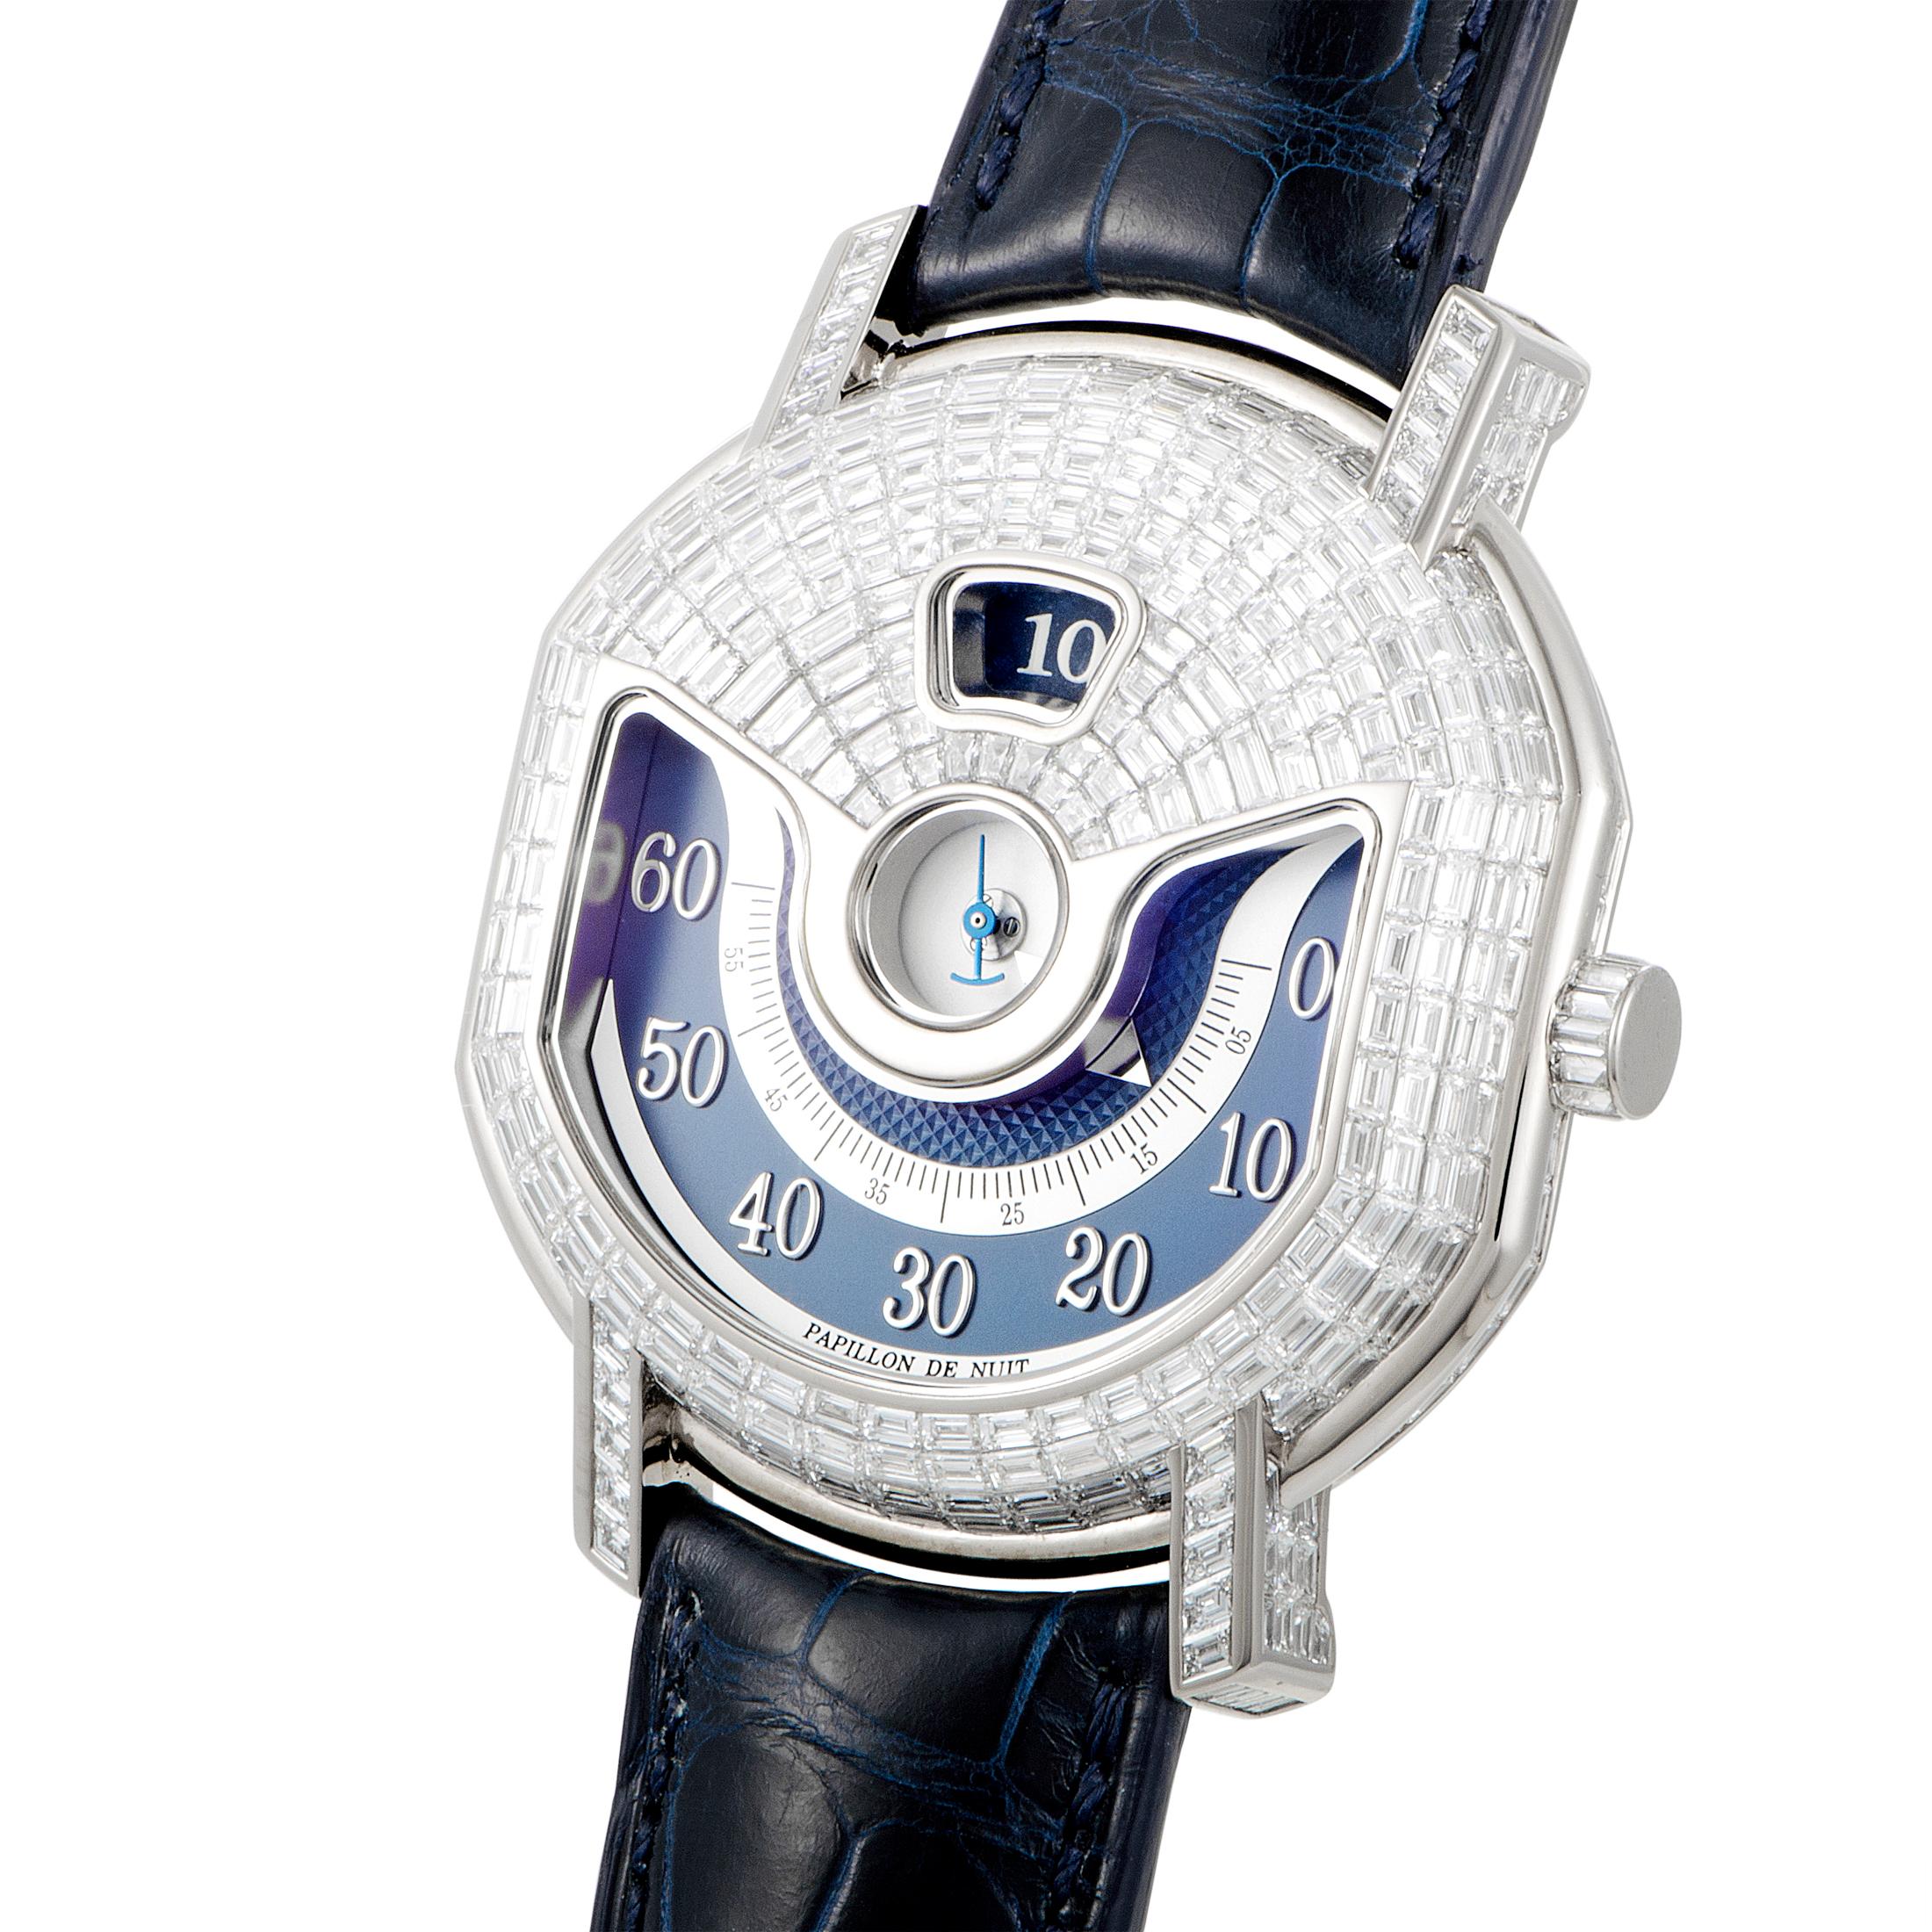 This is a unique Daniel Roth timepiece, presented with a diamond-set 18K white gold case that boasts see-through back. The case is mounted onto a blue leather strap fitted with a diamond-set tang buckle. Powered by a self-winding movement, this